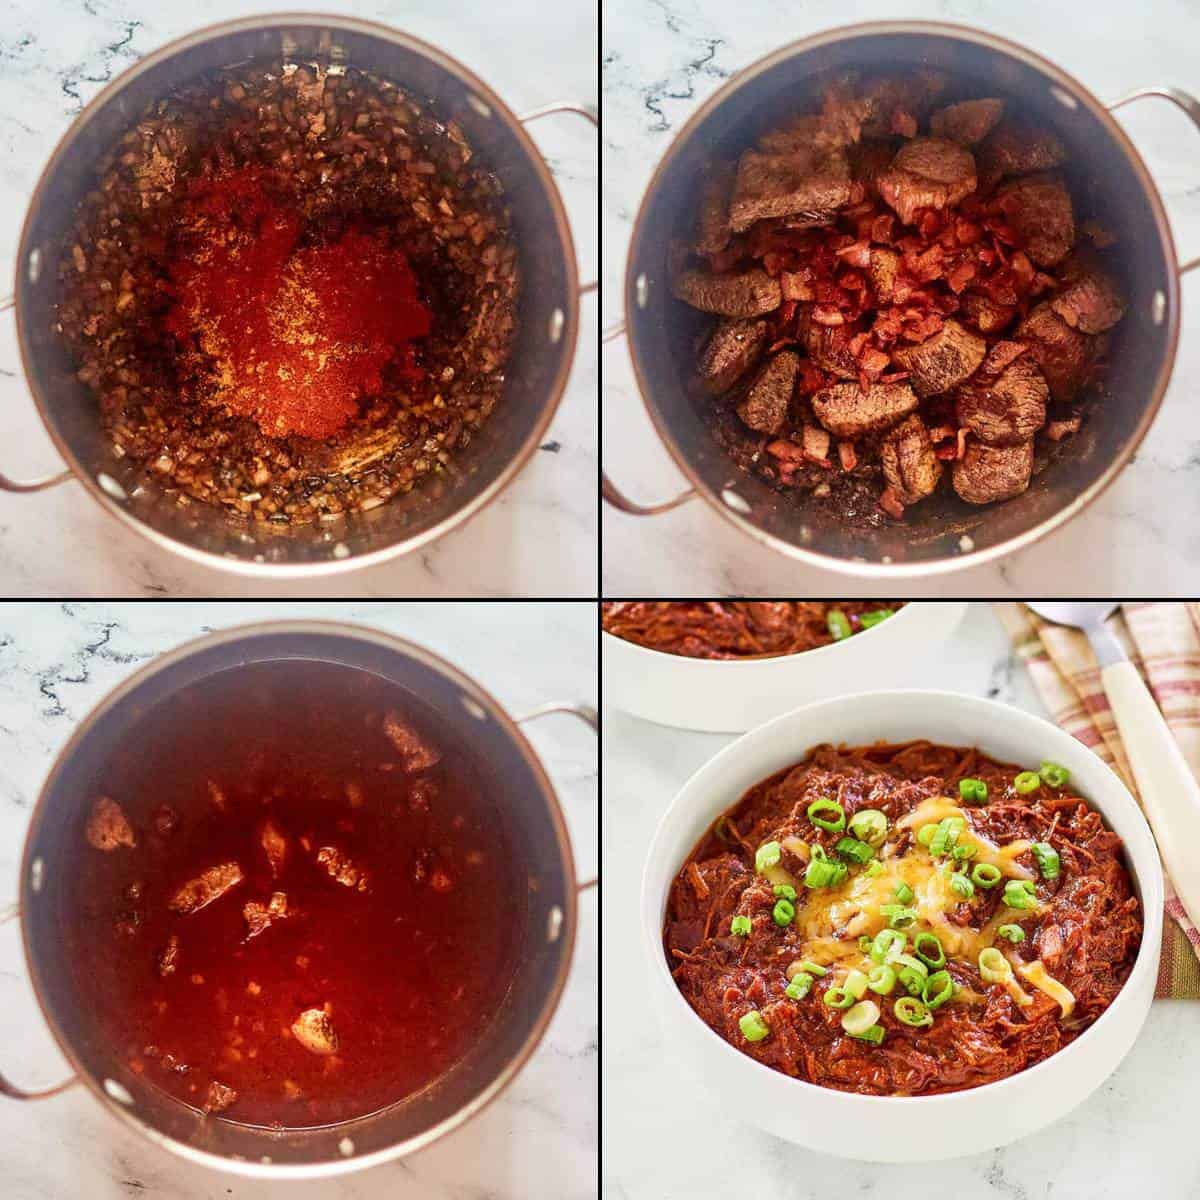 Collage of making brisket chili and the finished chili in a bowl.